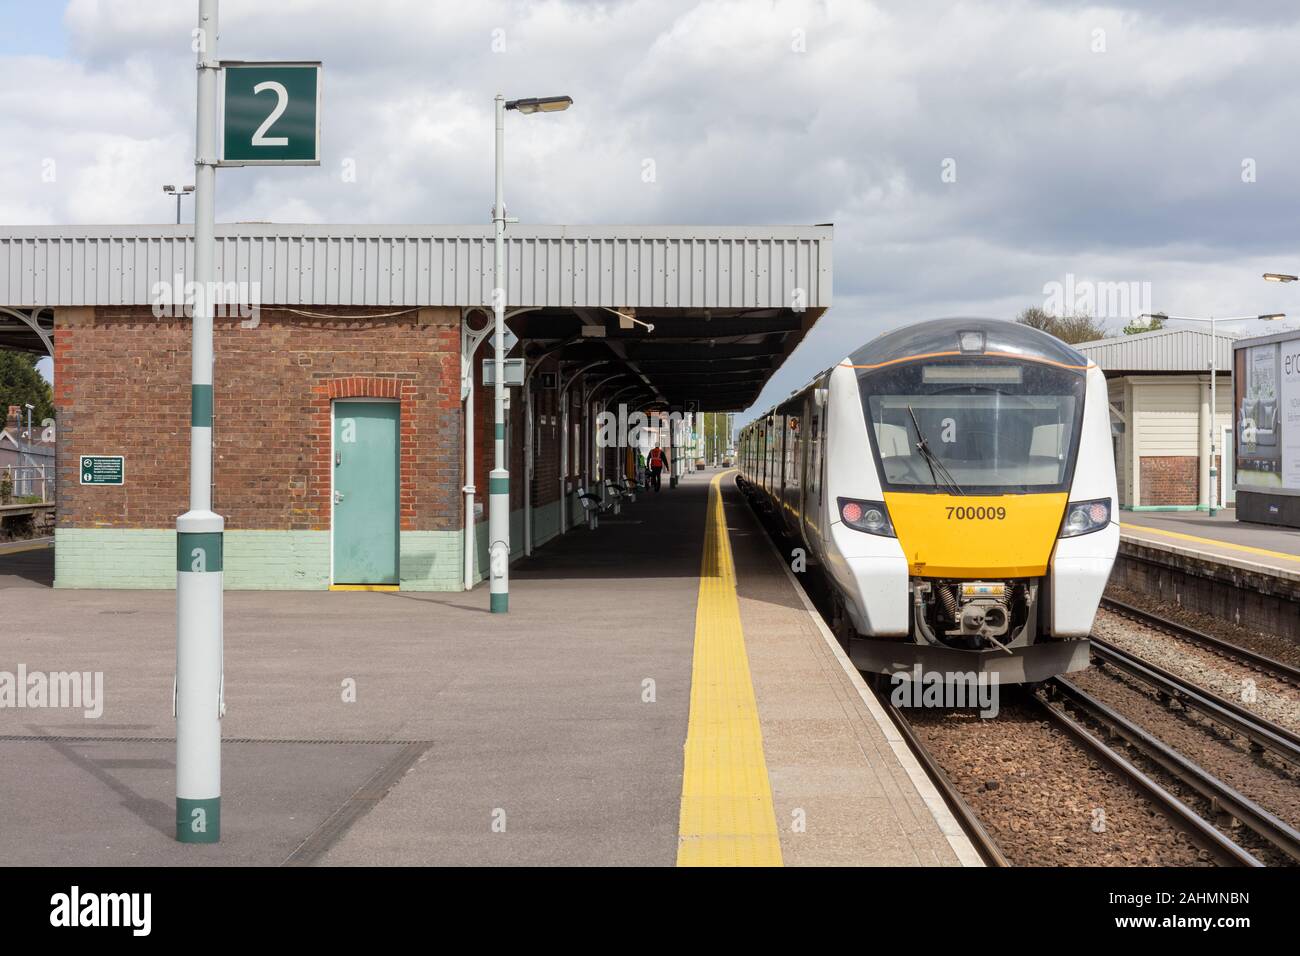 Three Bridges, Sussex, UK; 26th April 2018; British Rail Class 700 Train Manufactured by Siemens Mobility and Operated by Thameslink  at Platform Stock Photo